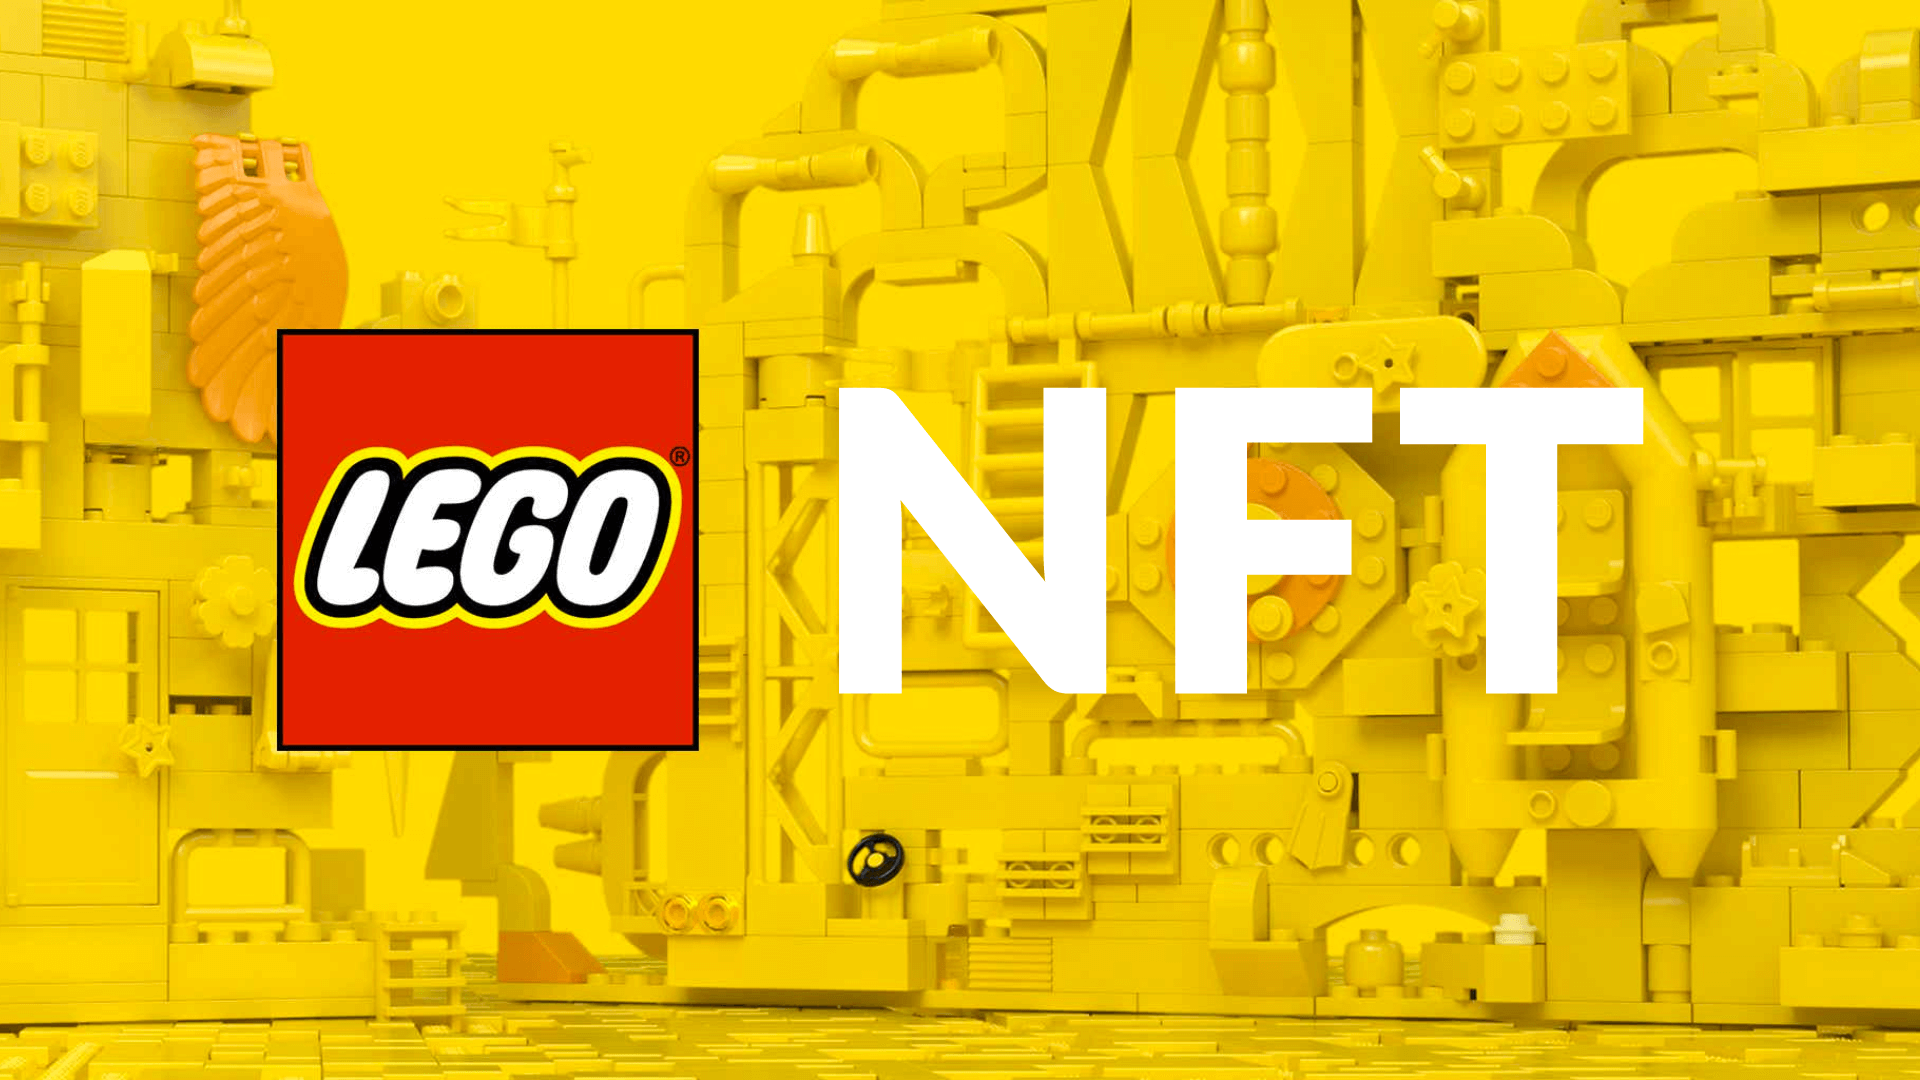 LEGO to Join NFT? A "Brick" Breaking News